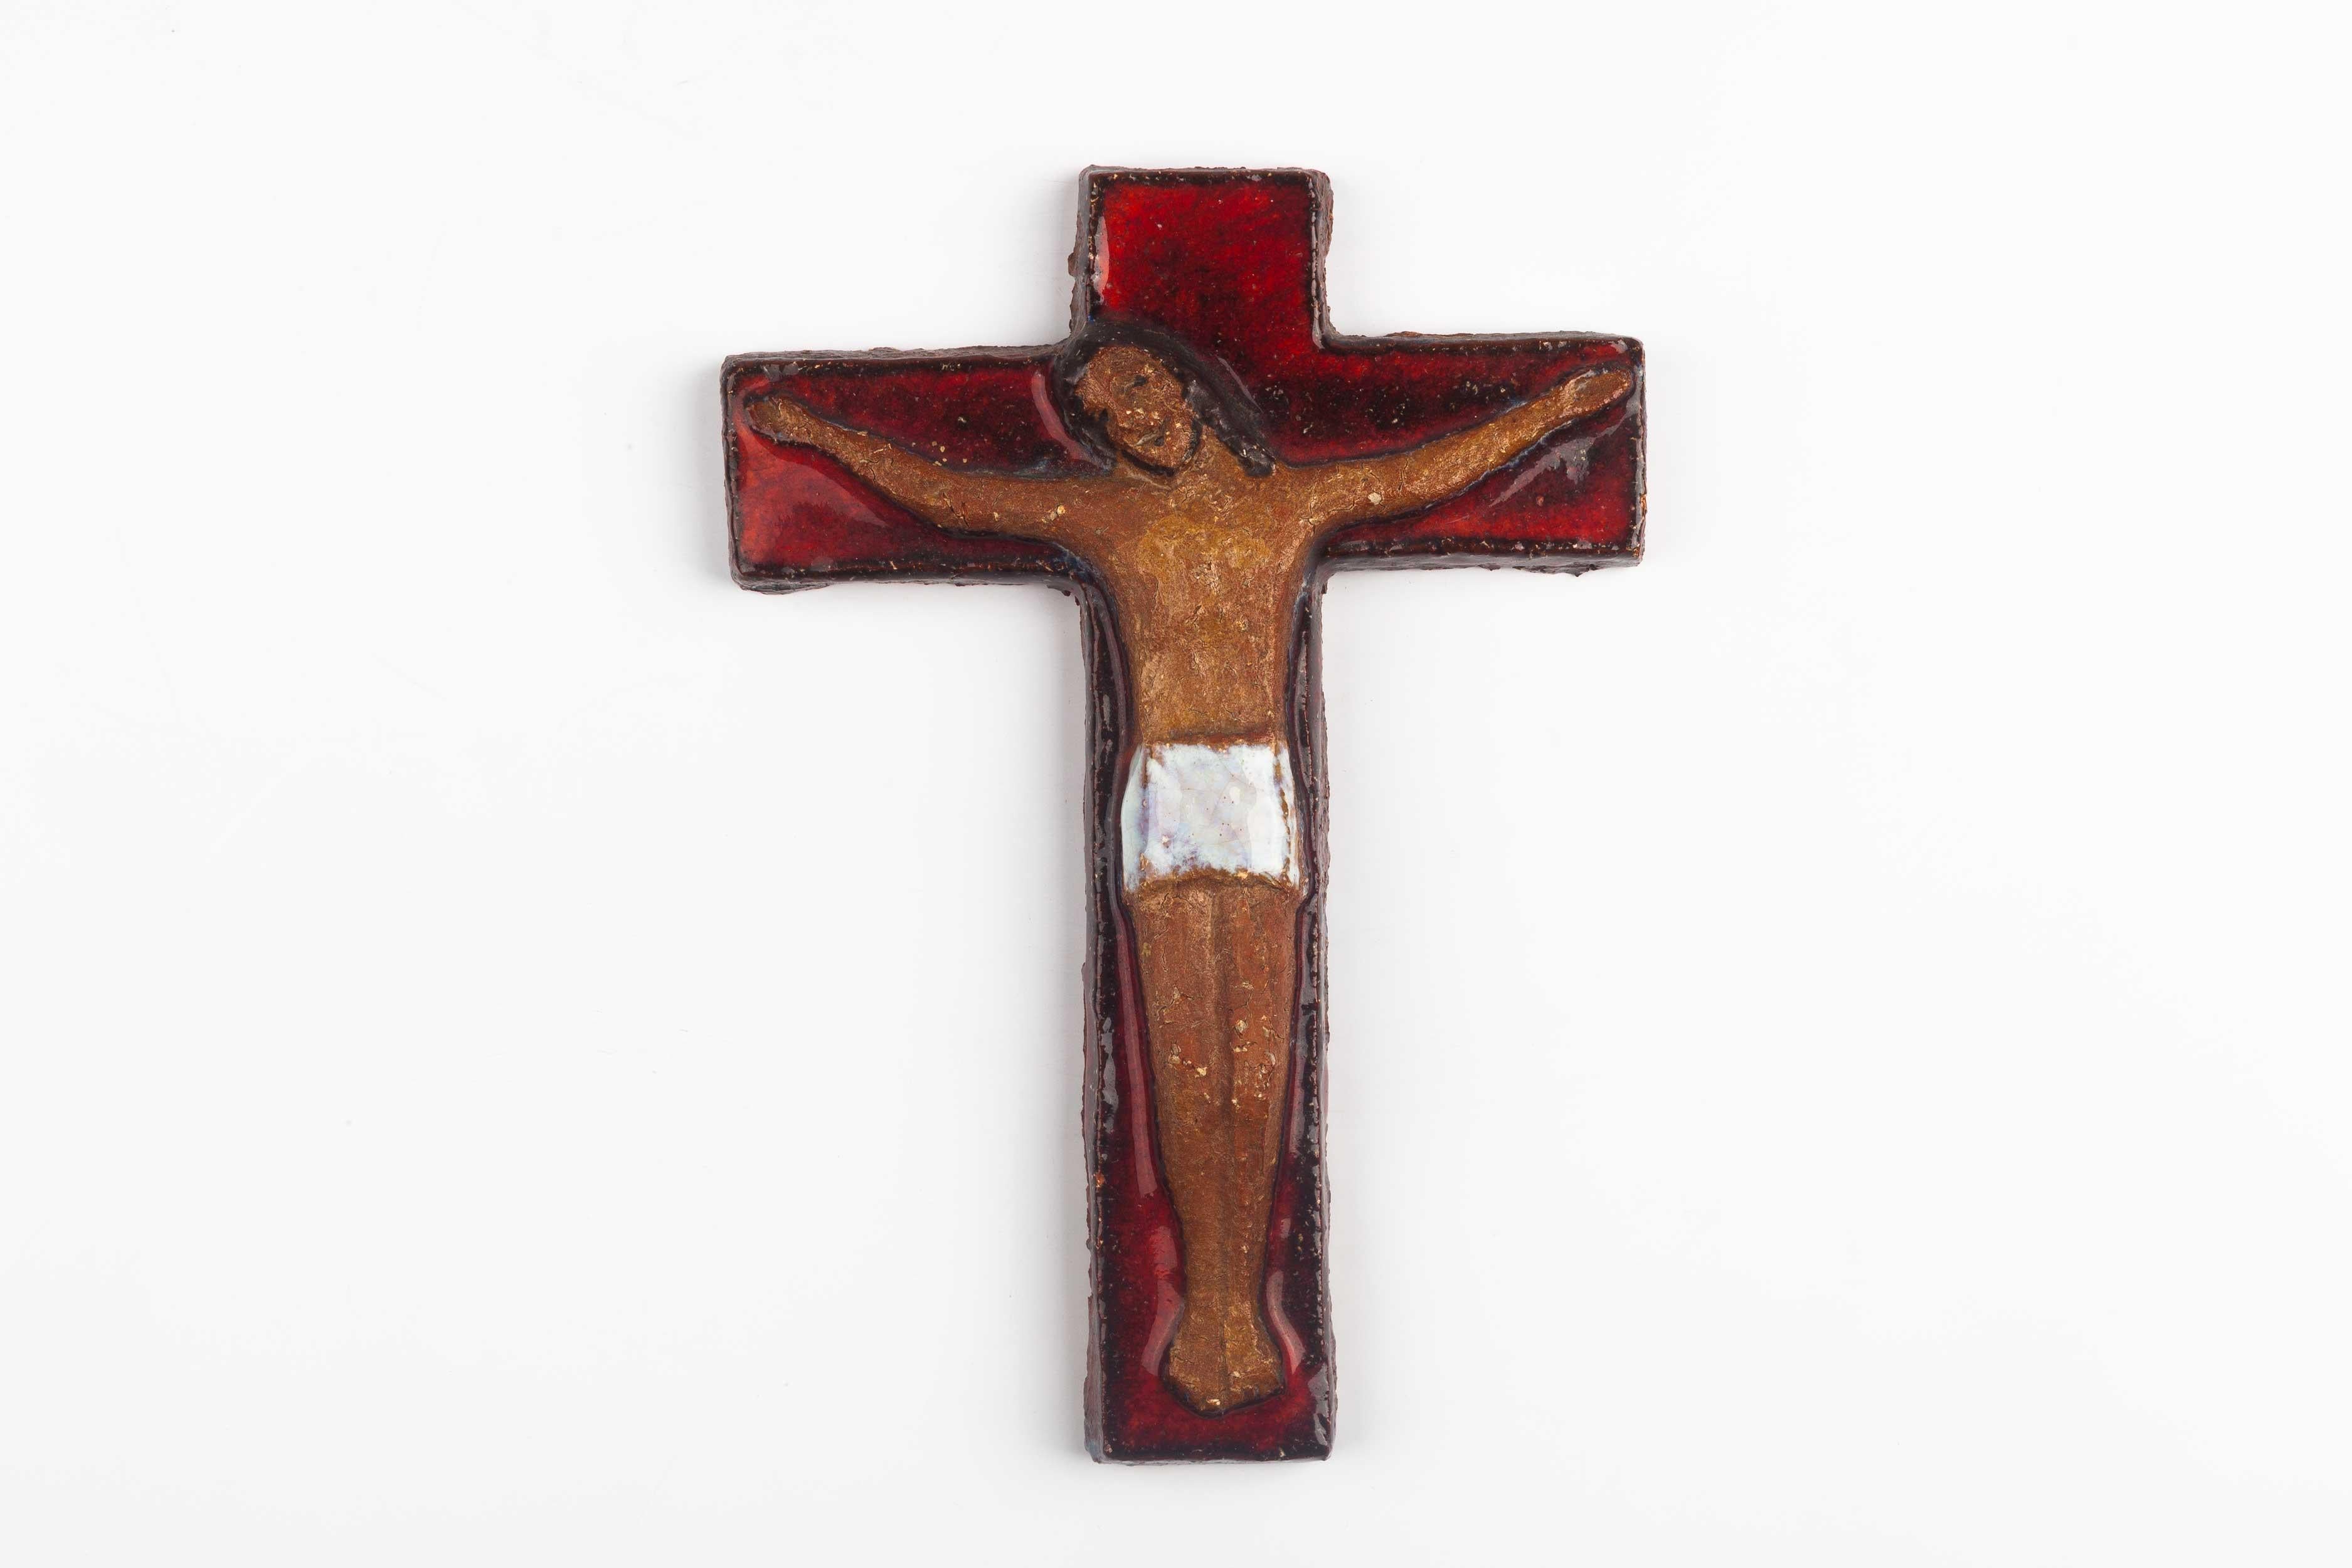 European ceramic wall crucifix with matte brown Christ with white swath over glossy red cross. Christ figure was made with modernist volumes and an original style of pose.

Dimensions

6.38 in. H x 5 in. W x 1 in. D

16 cm H x 13 cm W x 3 cm